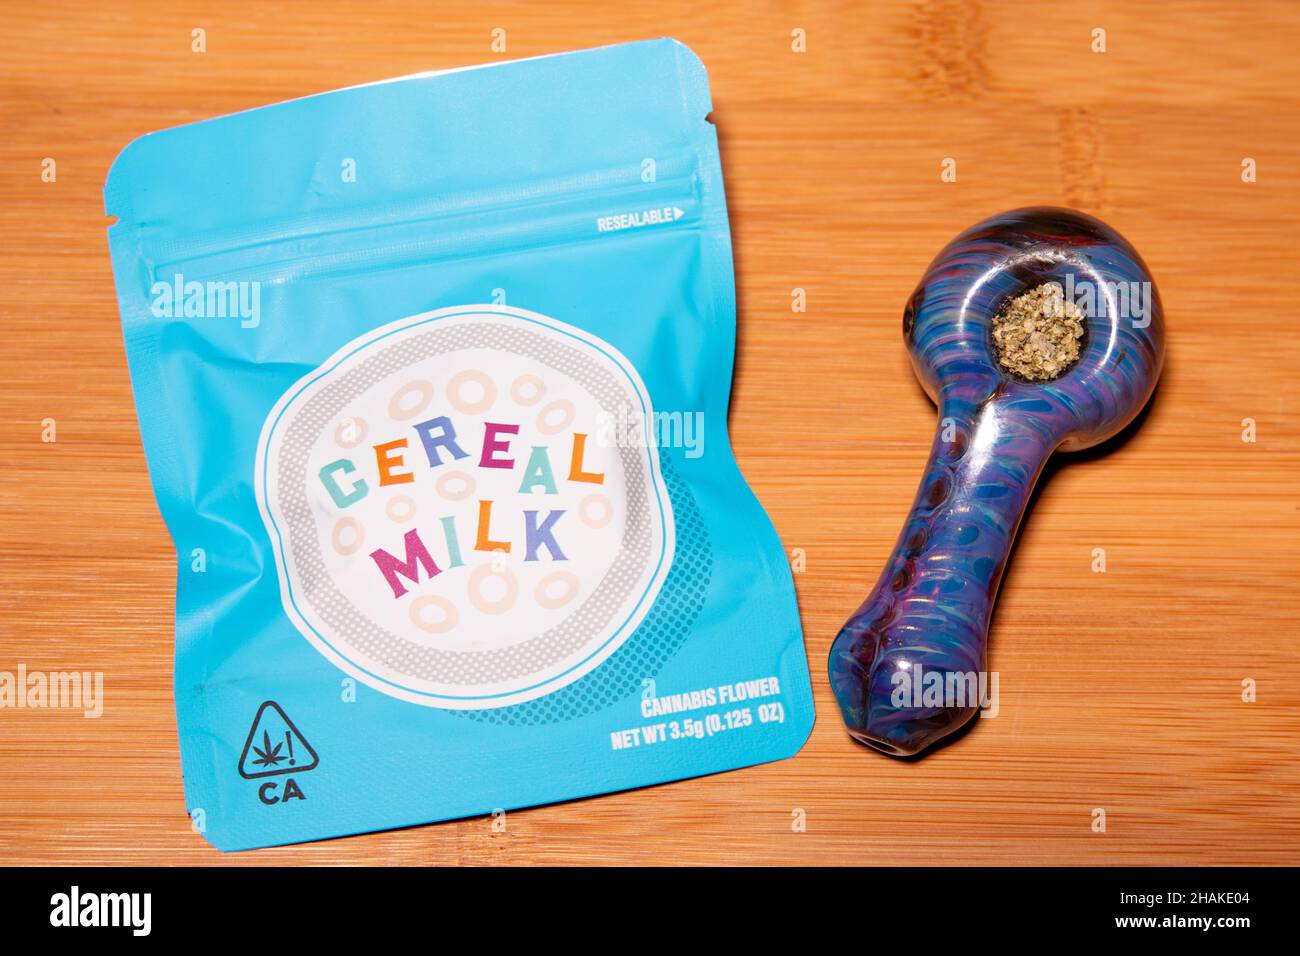 Package of Cereal Milk by Cookies legal cannabis from California Stock Photo